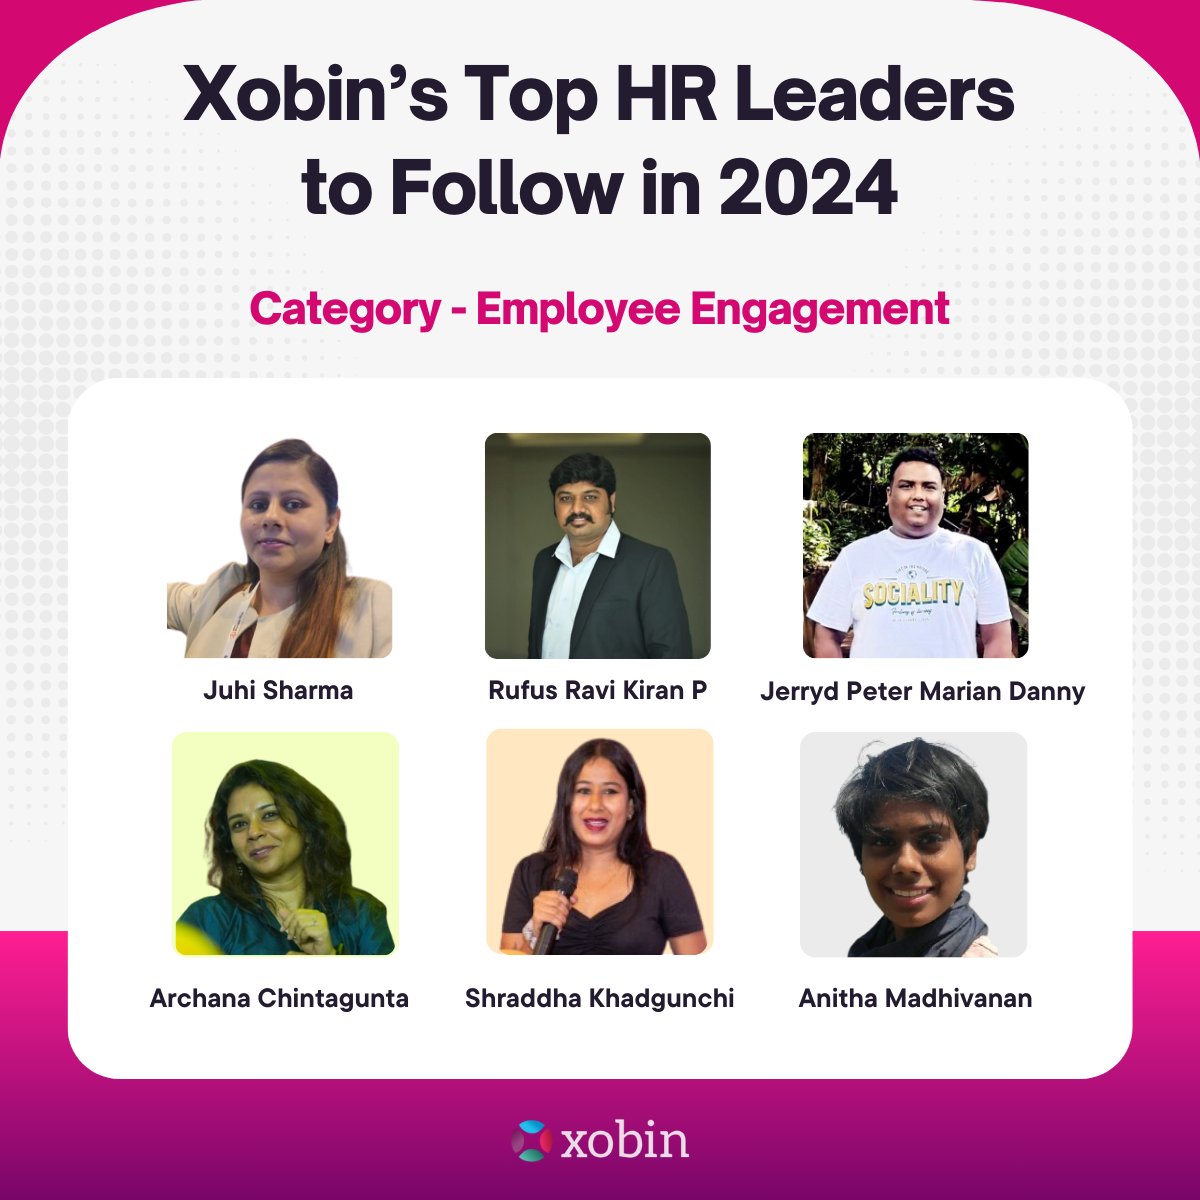 Leading the Way: Meet the Top HR Leaders in Employee Engagement! These visionaries are transforming organizations through innovative training strategies, fostering growth, and maximizing potential. Check out the entire list here👇 xobin.com/blog/top-50-hr… #HRLeaders2024